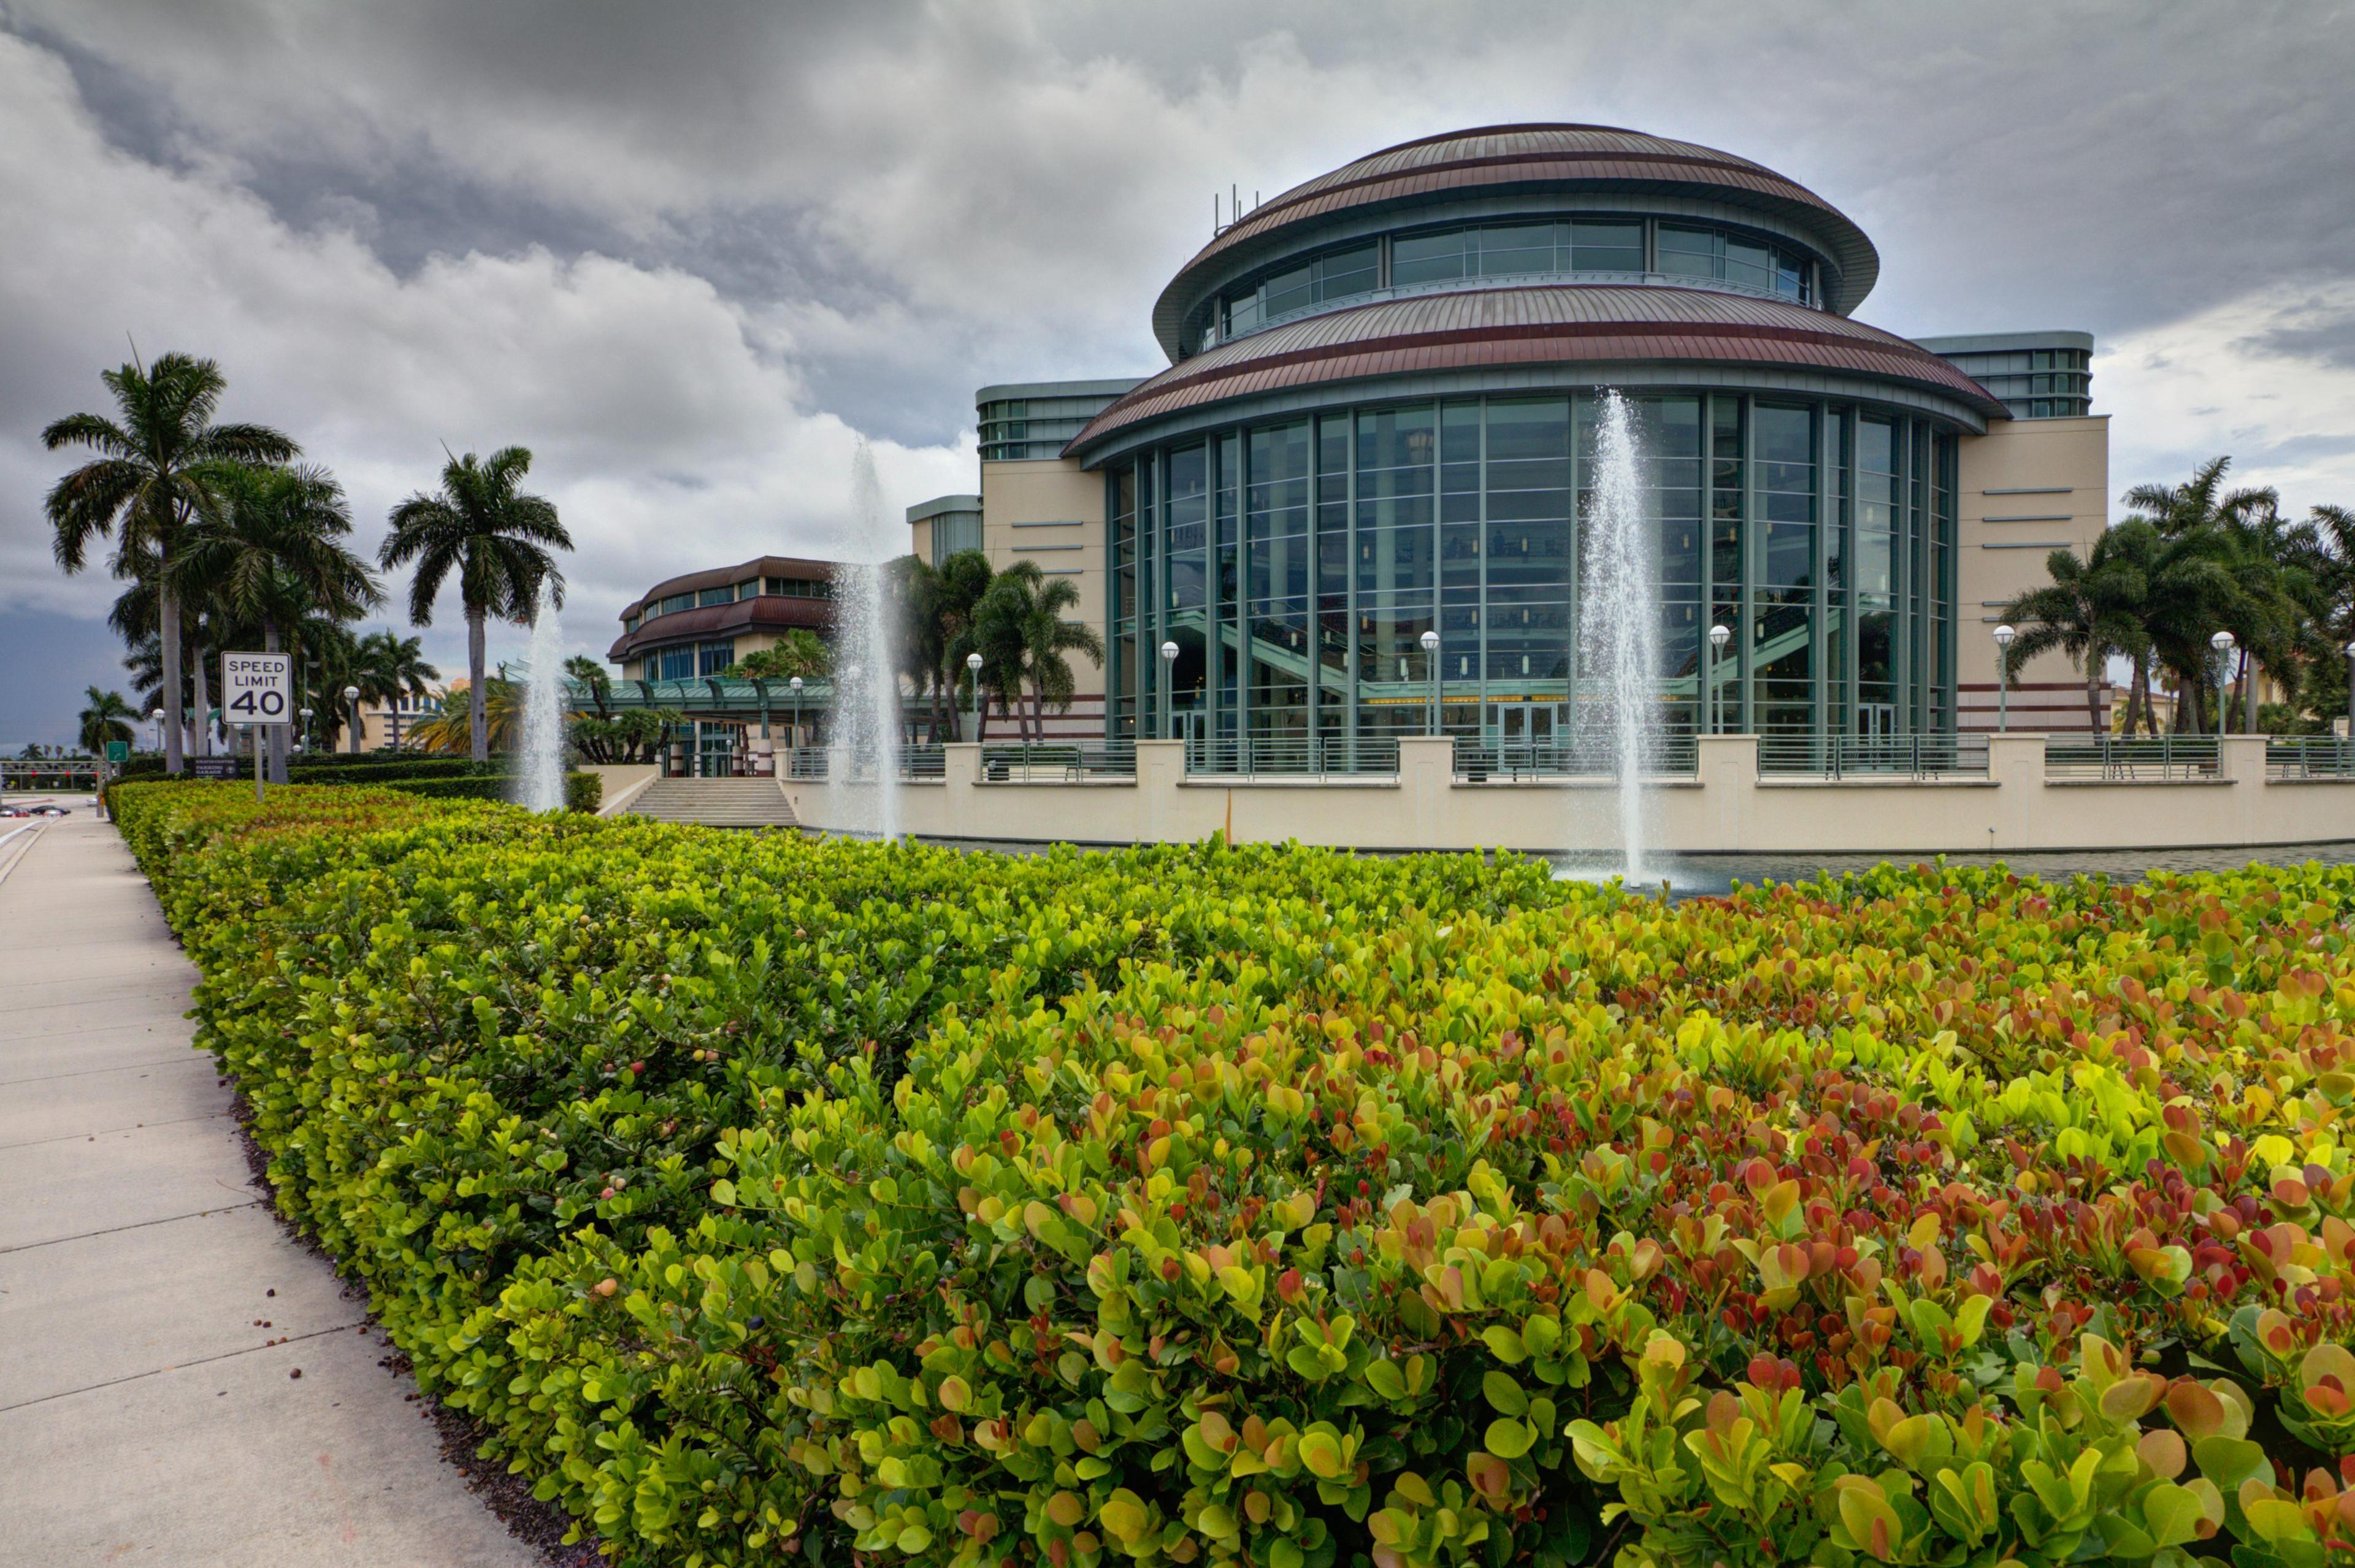 Raymond F. Kravis Center for the Performing Arts